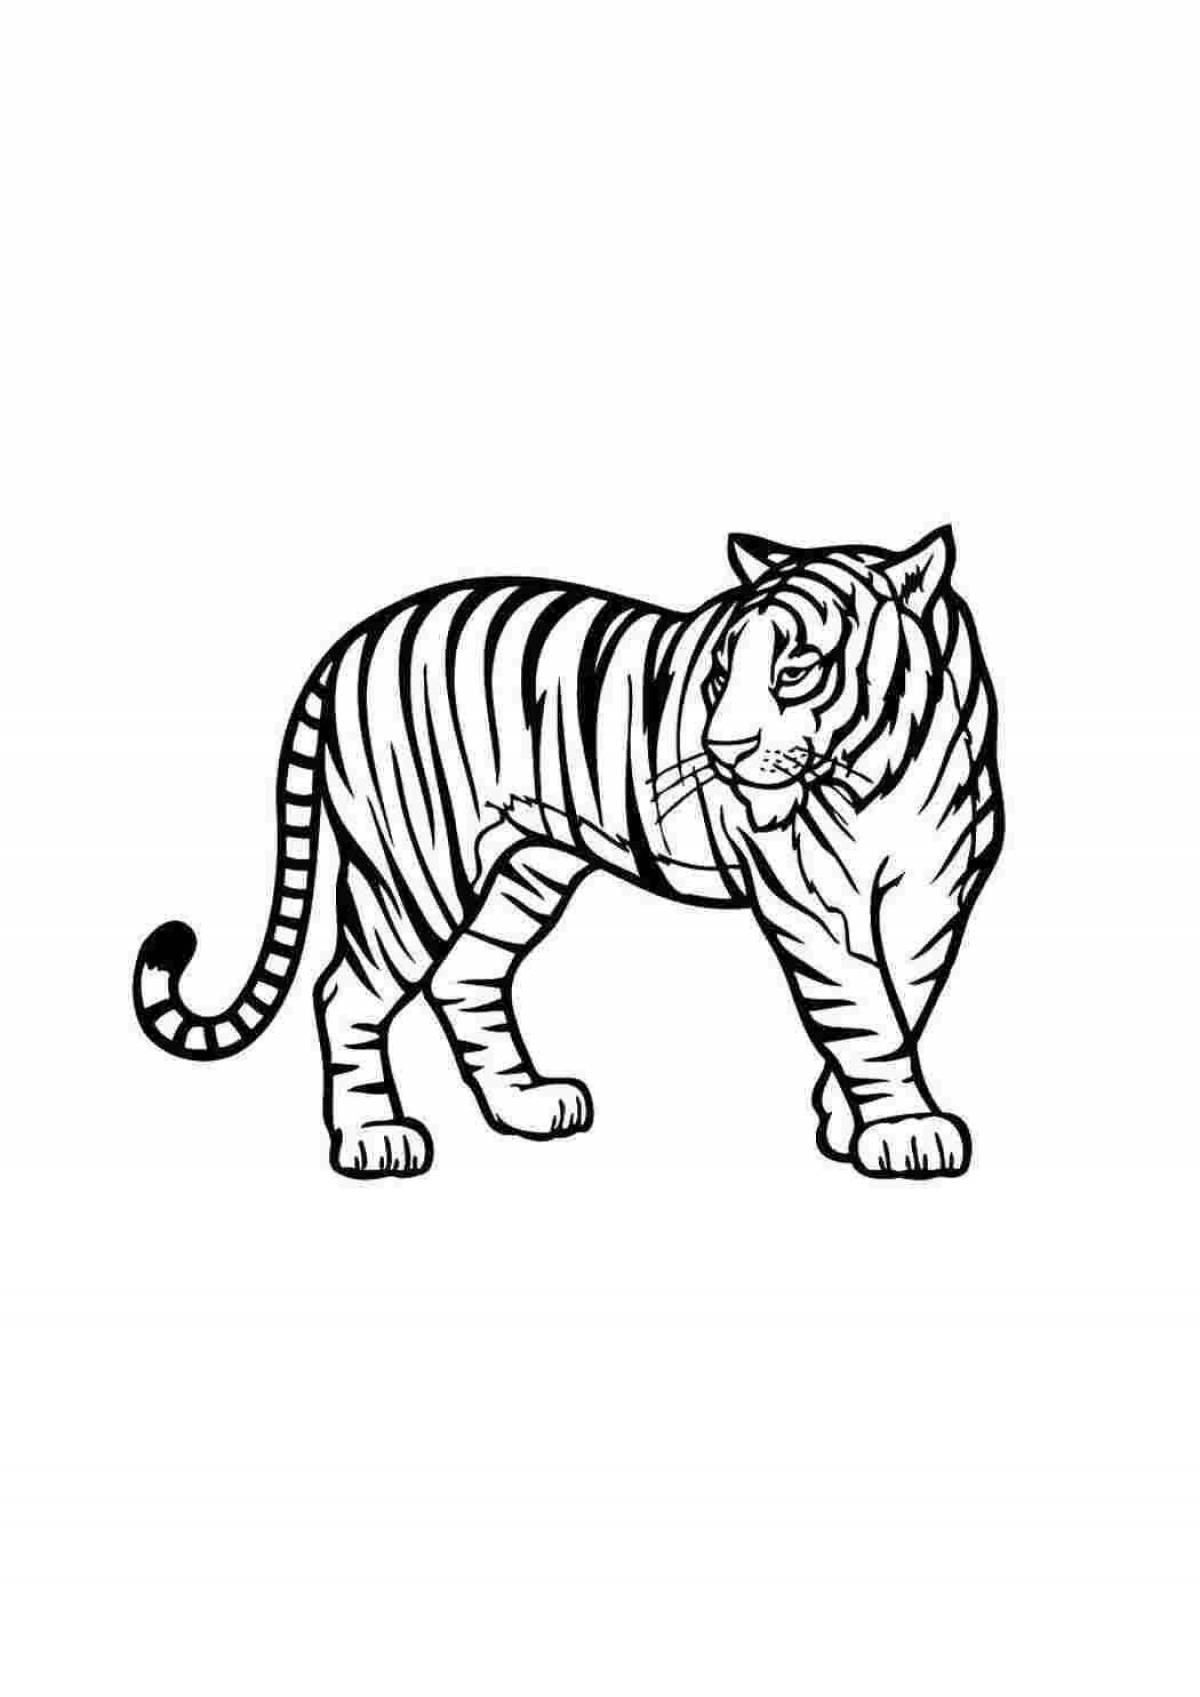 Exquisite tiger without stripes for kids